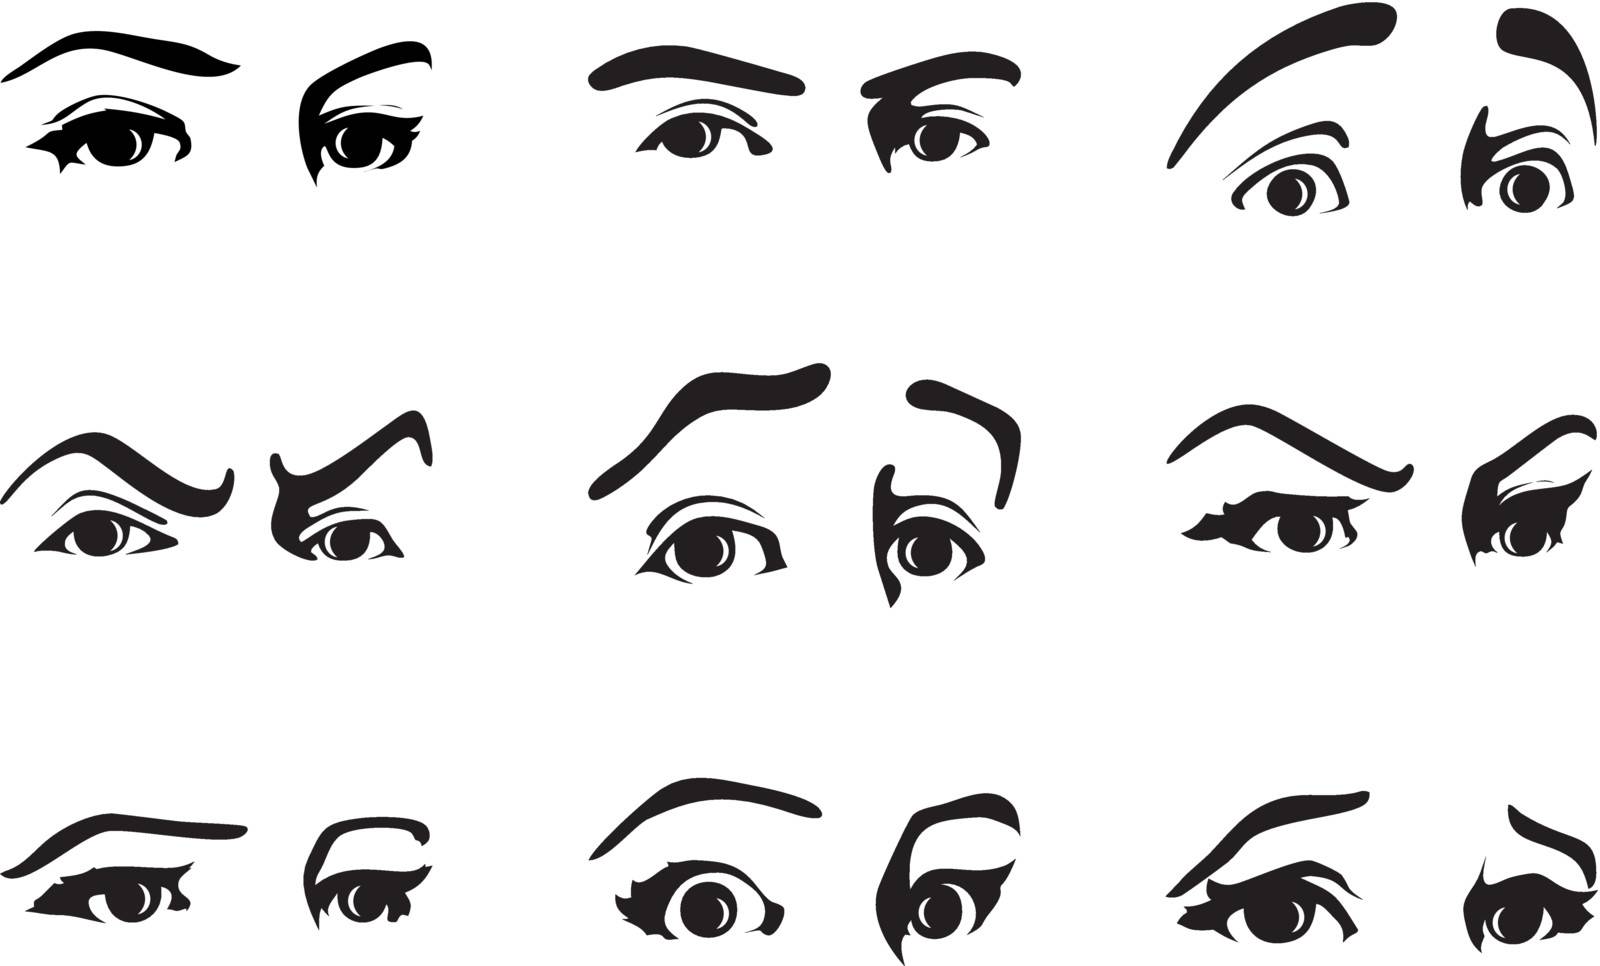 Different expression of an eye expressing emotions. A vector illustration